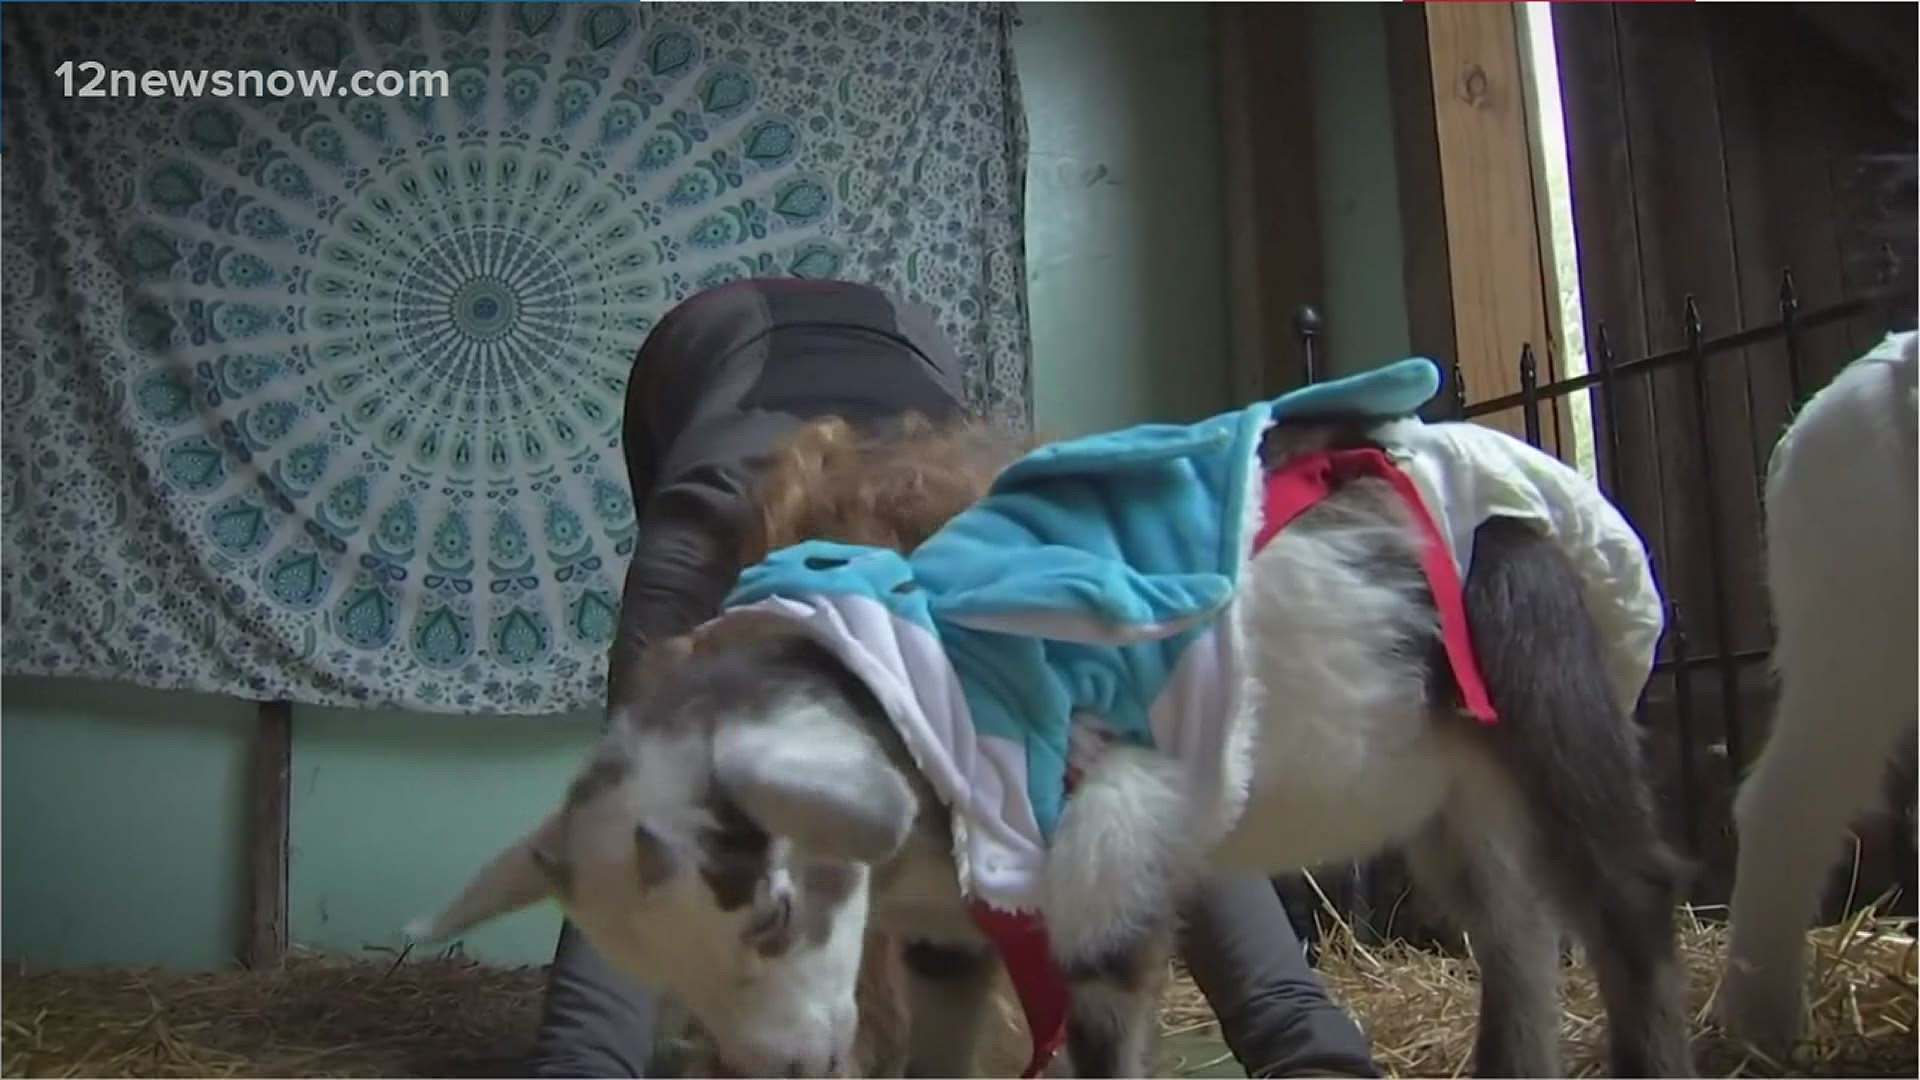 No matter how bad of a day you're having, a room full of baby goats in diapers and suspenders is sure to bring you udder joy!